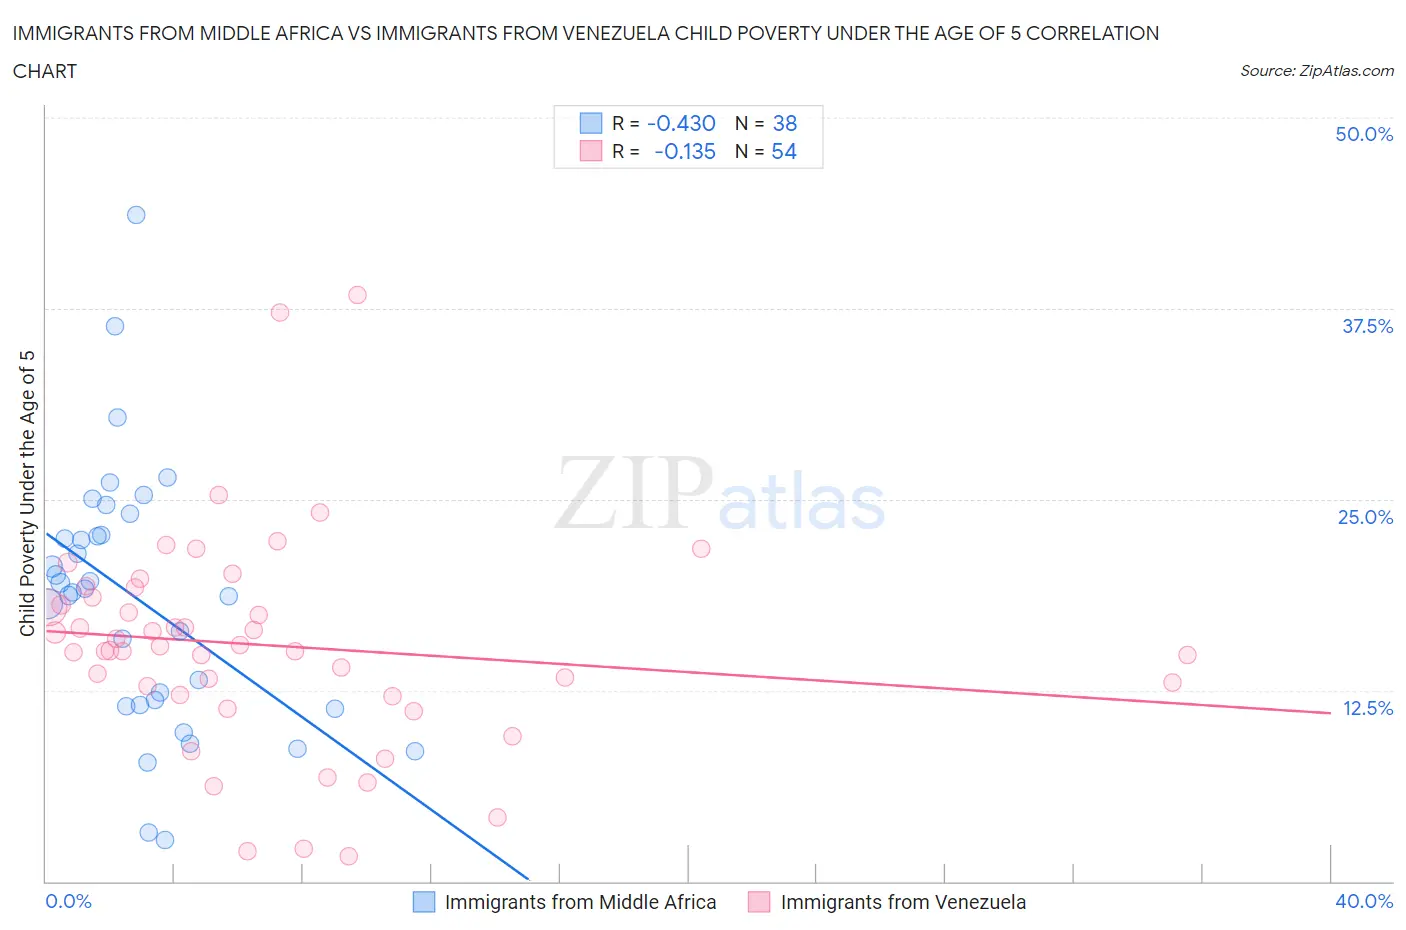 Immigrants from Middle Africa vs Immigrants from Venezuela Child Poverty Under the Age of 5